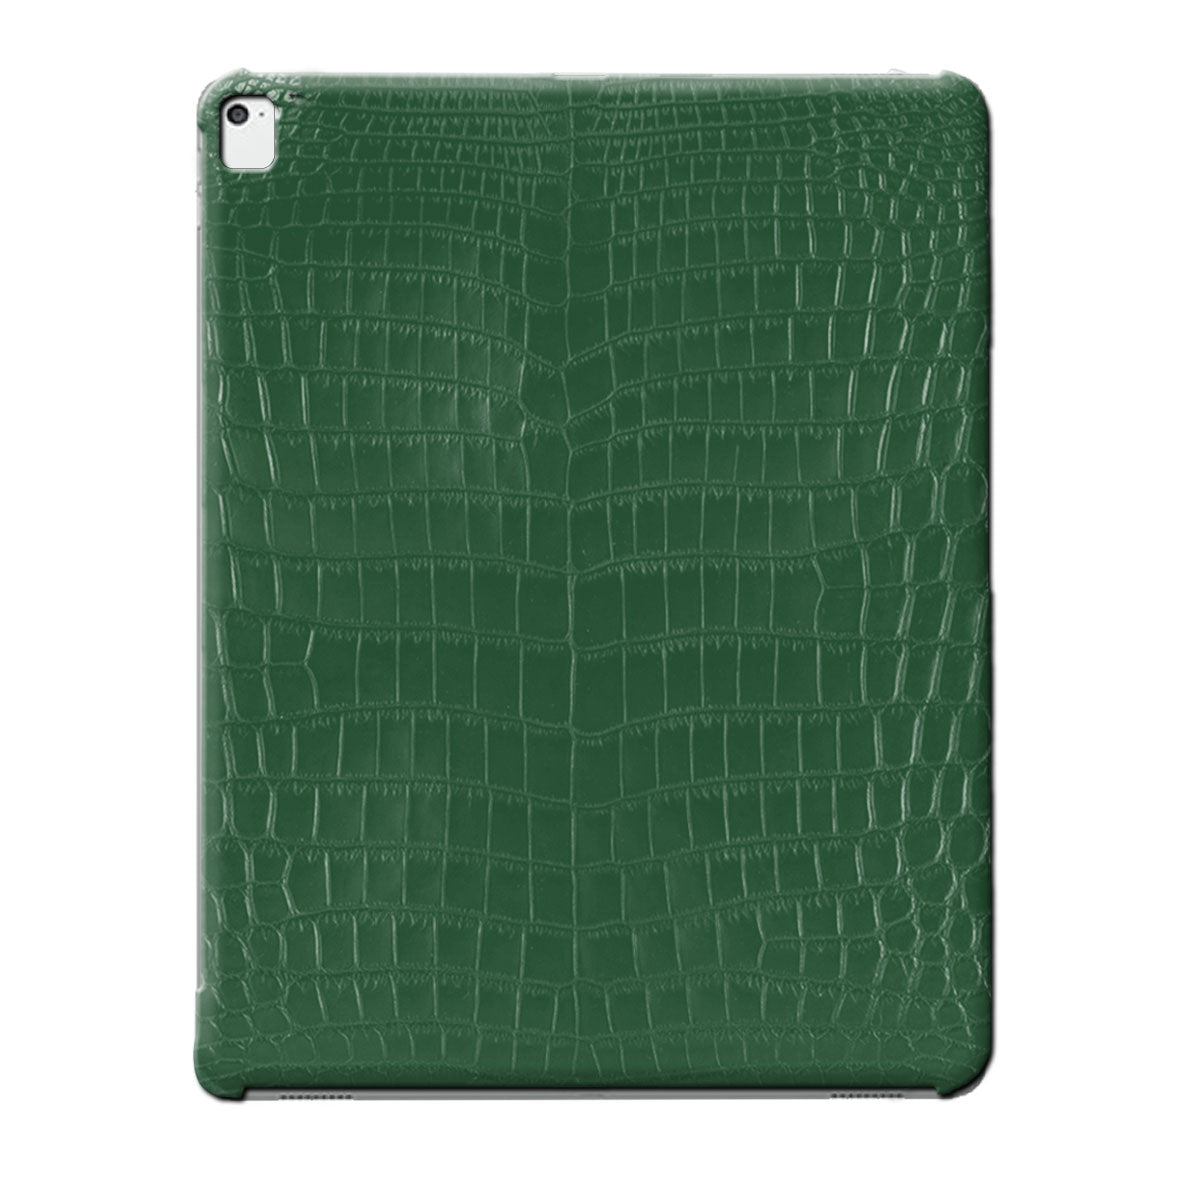 Leather iPad case / cover - iPad Pro 12.9 inches ( 1st to 6th generation ) - Genuine alligator